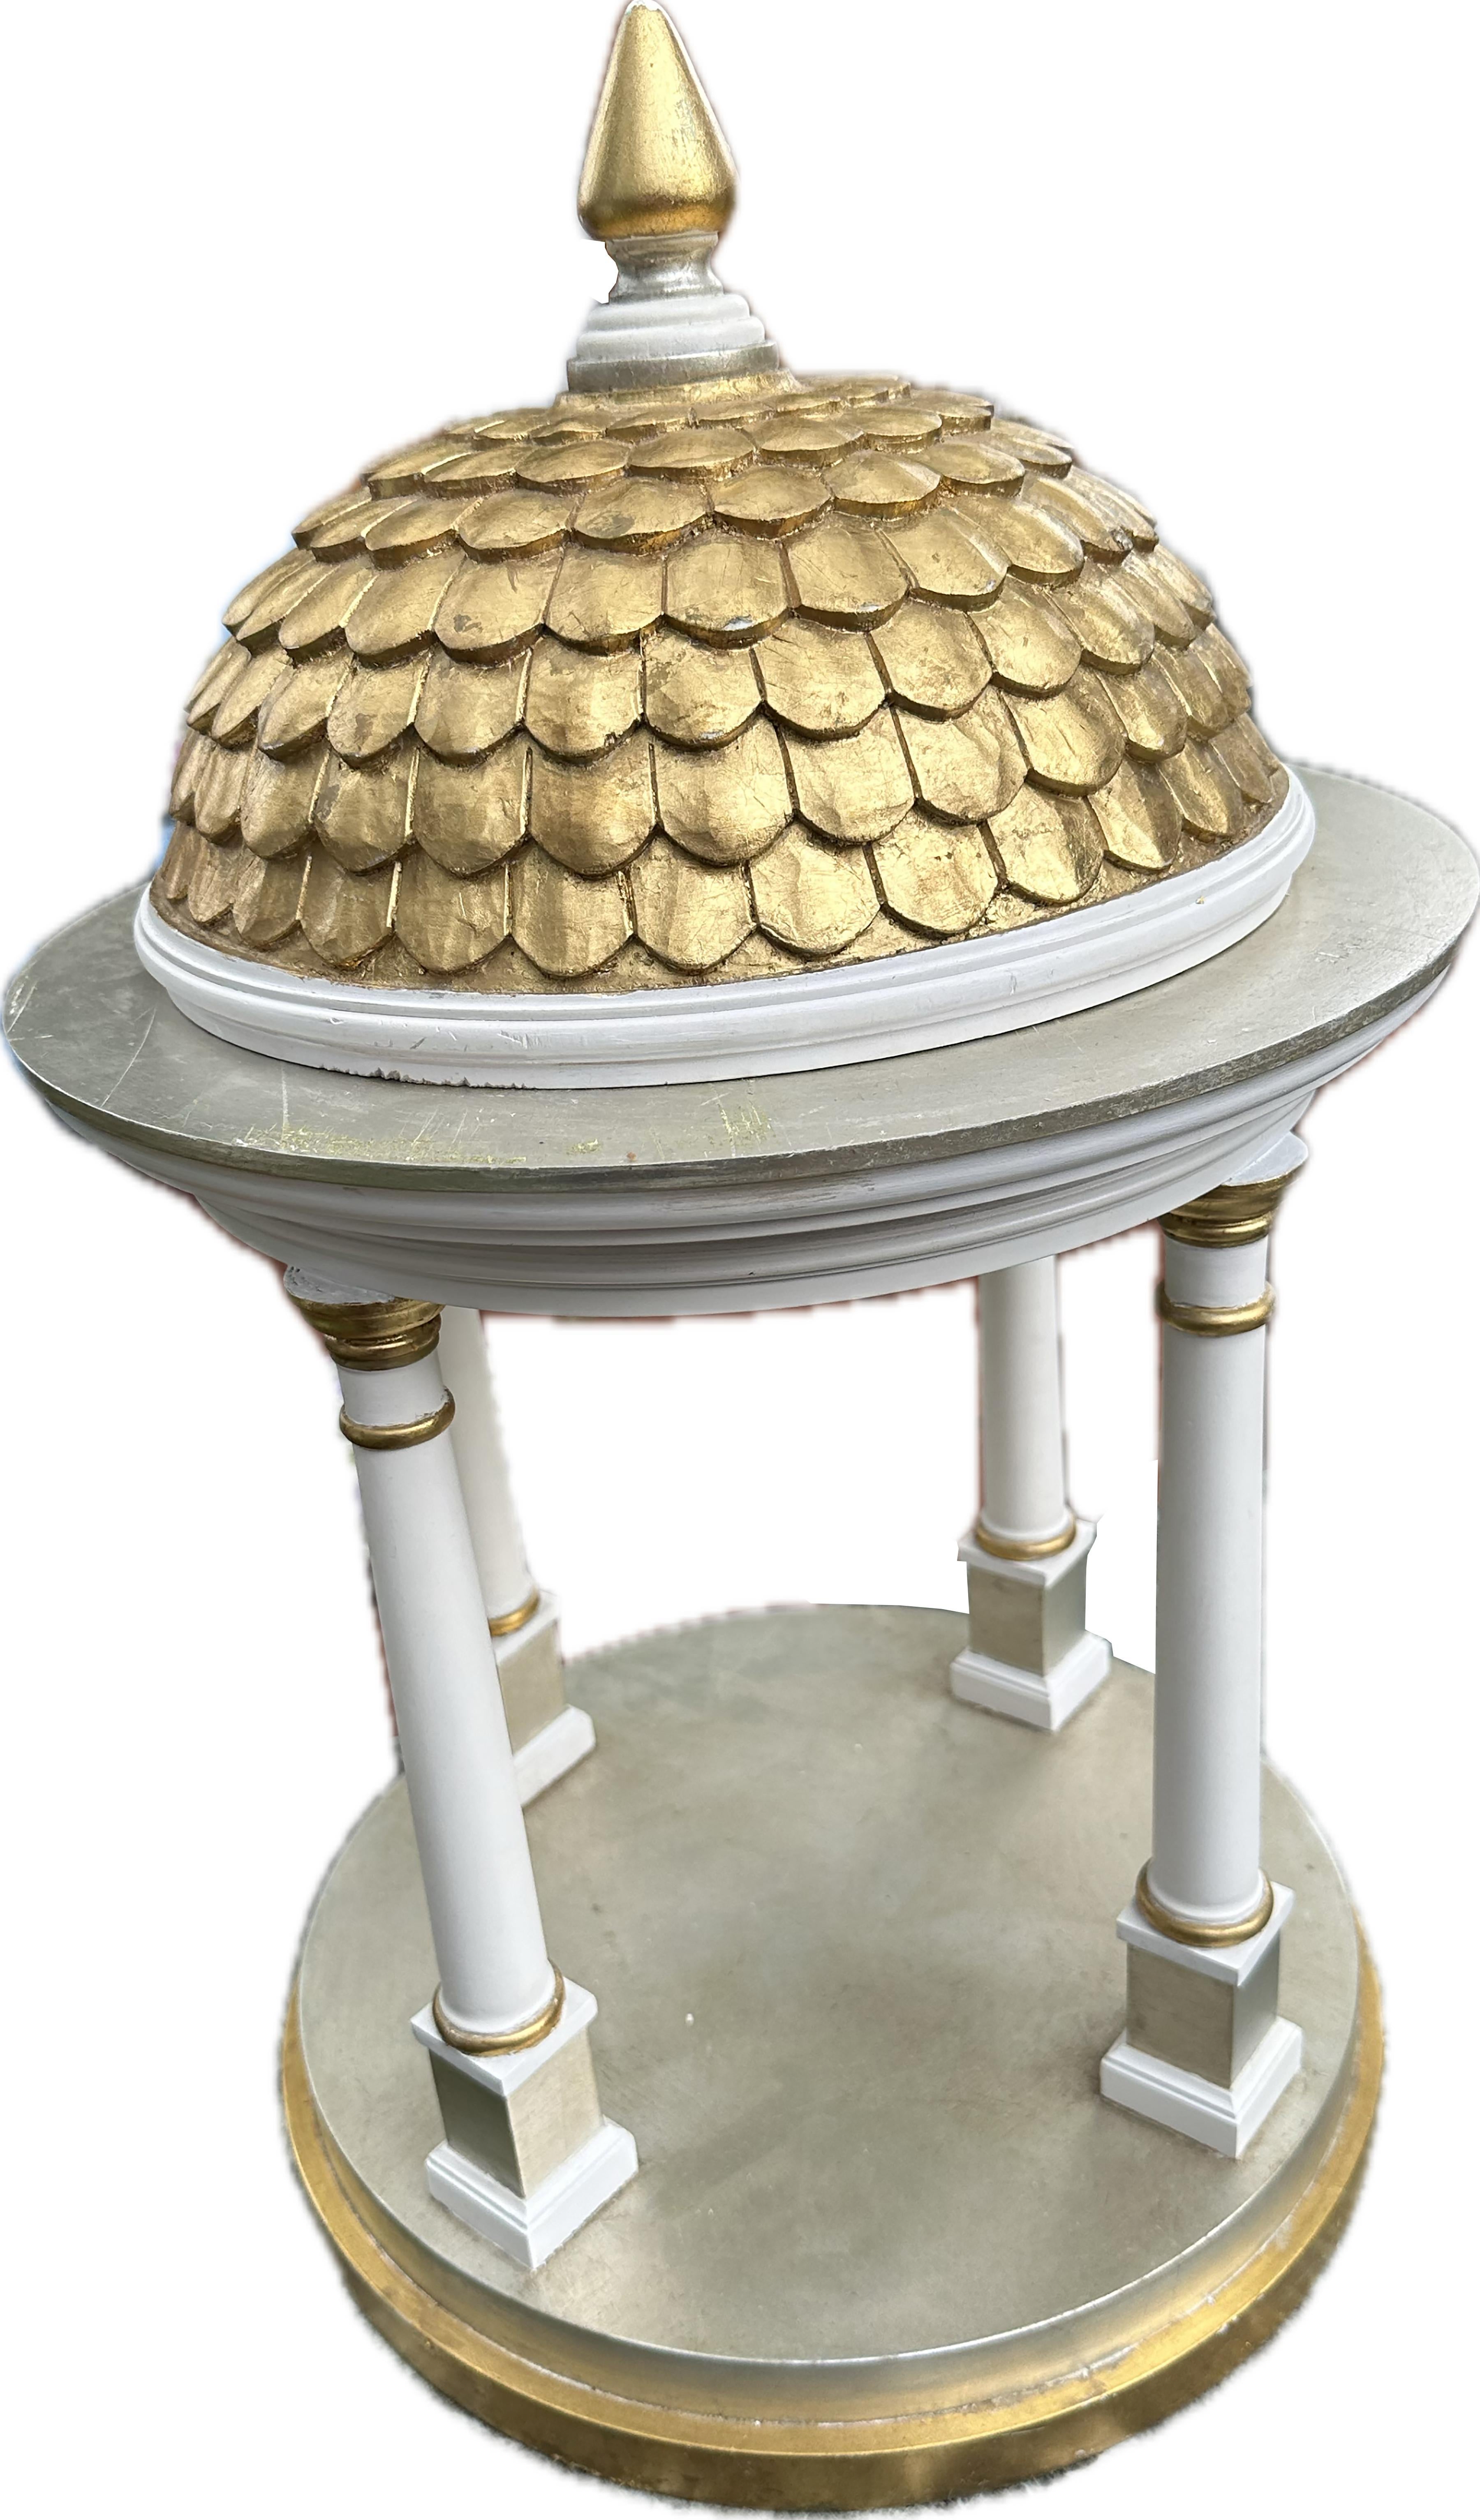 Wood Tempietto Style Gazebo Model with Gilt Romanesque Dome For Sale